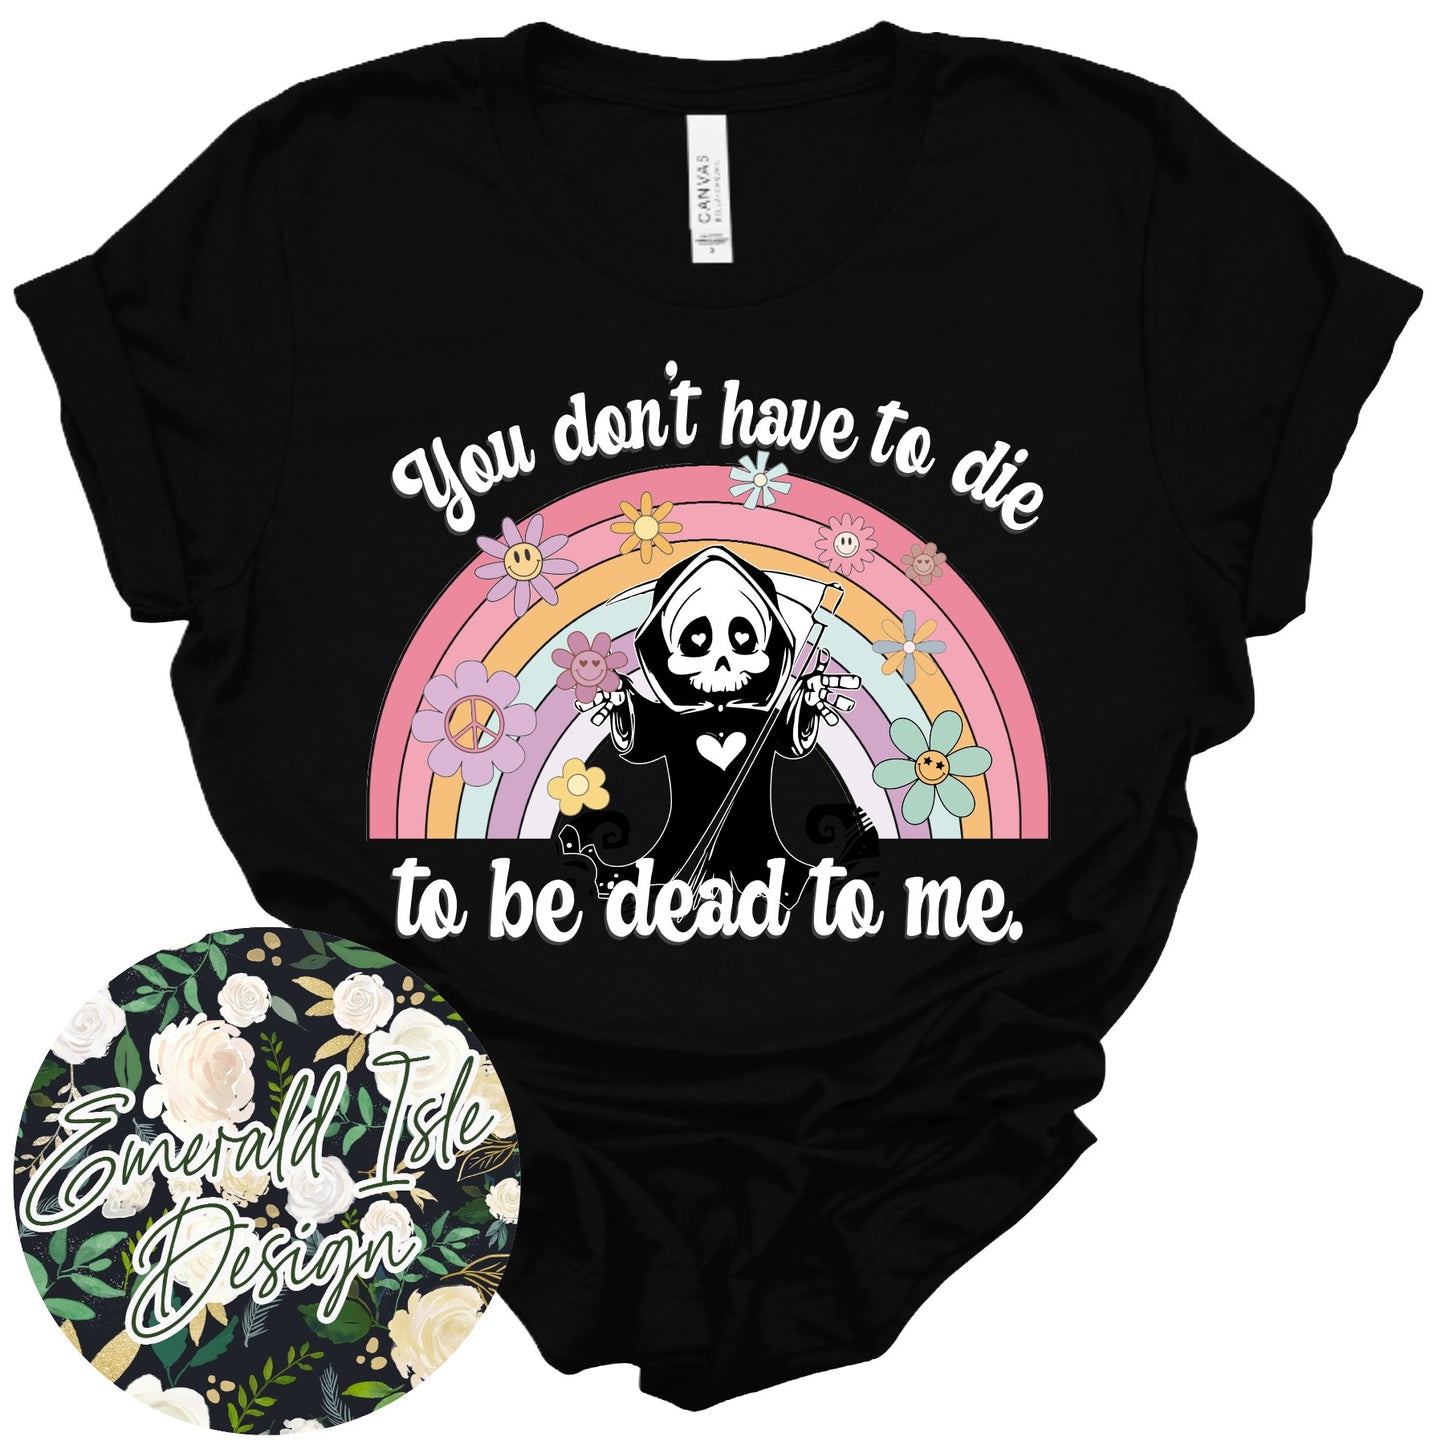 You Don't Have to Die to be Dead to Me Design